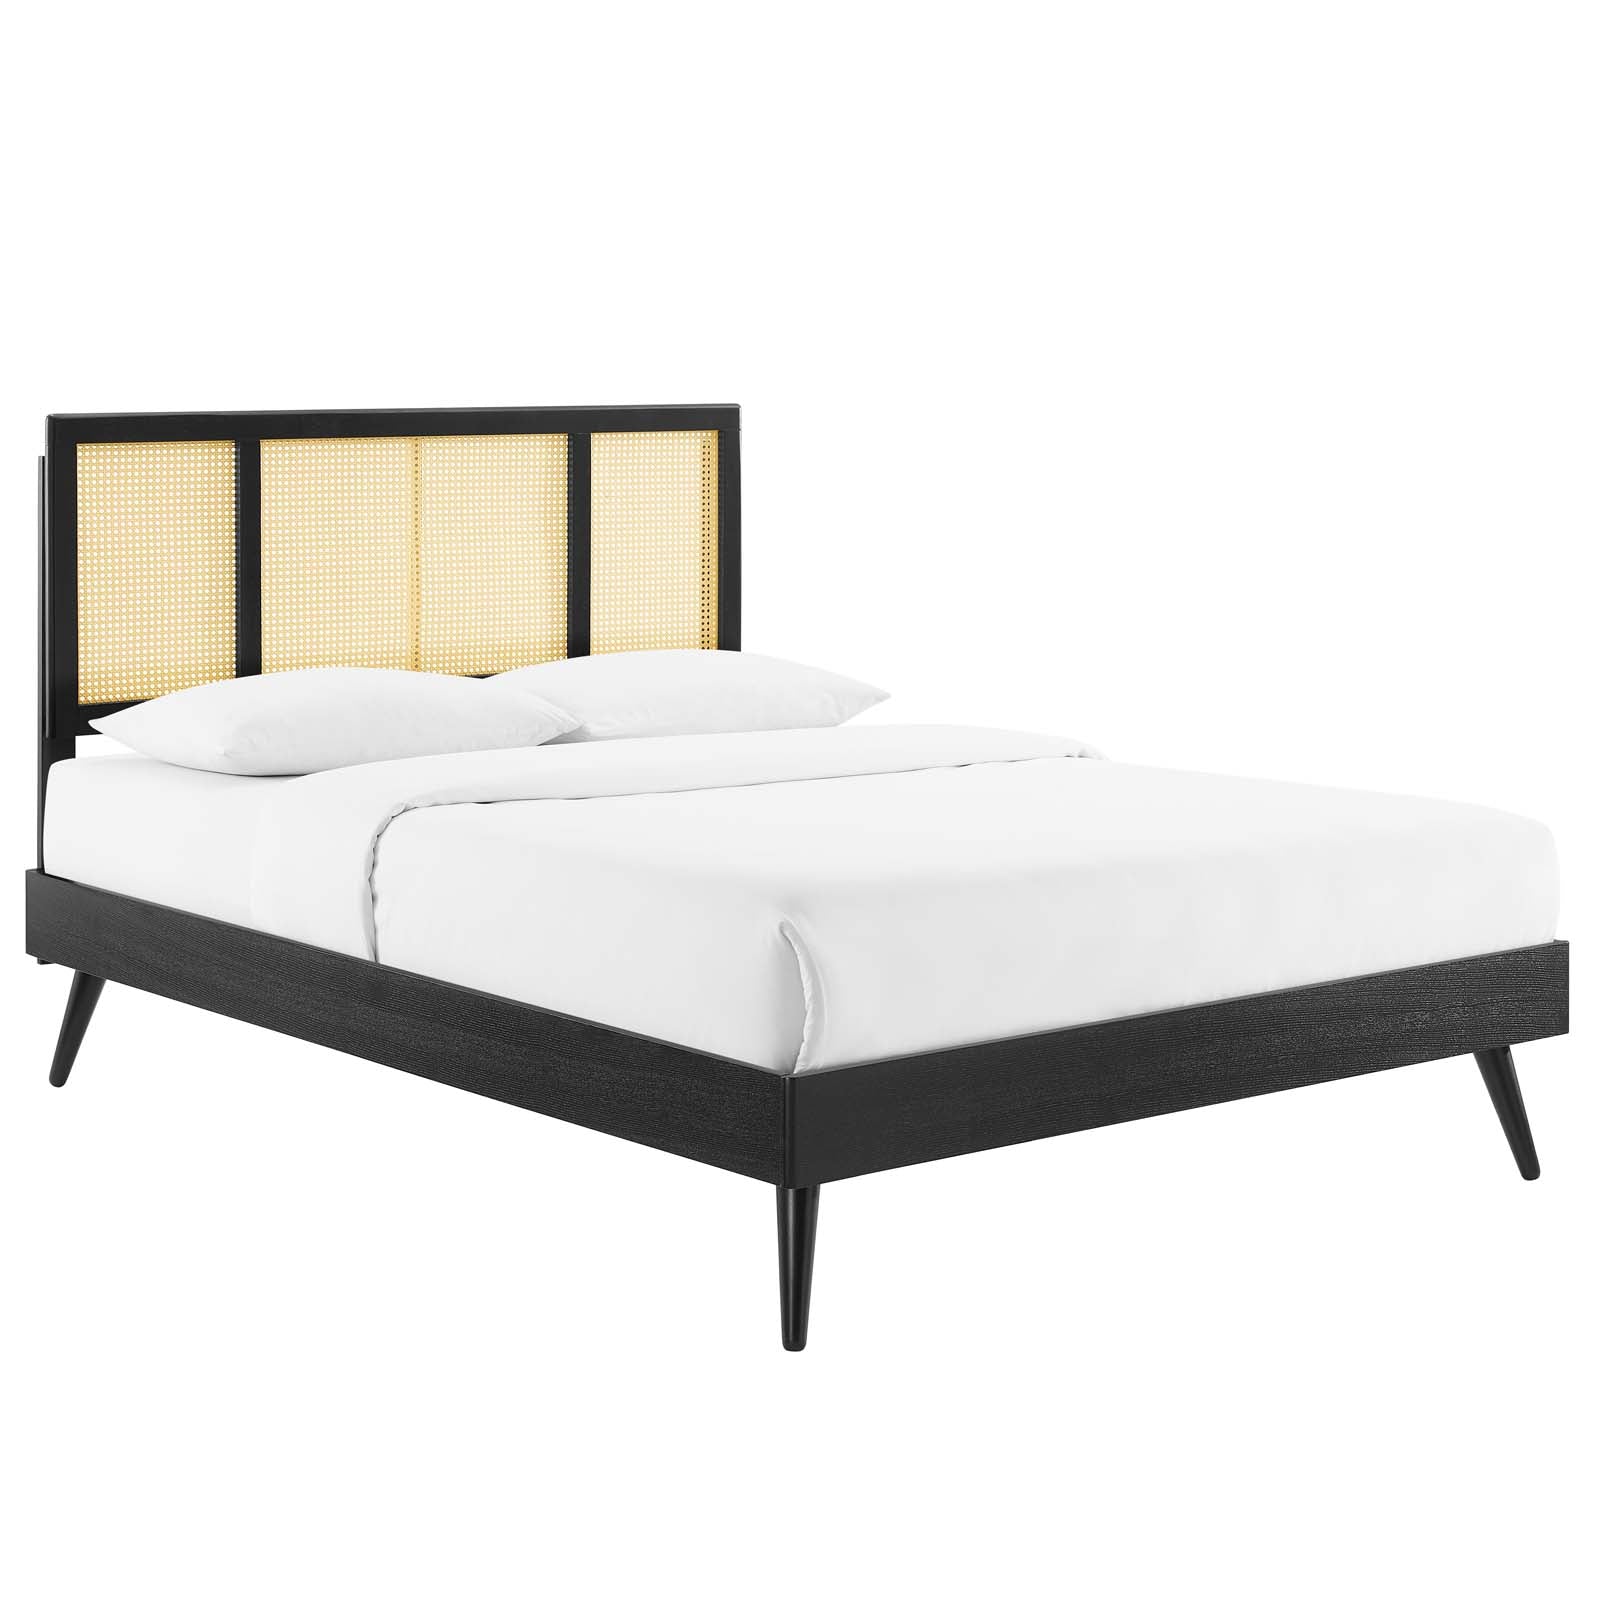 Modway Beds - Kelsea-Cane-and-Wood-King-Platform-Bed-With-Splayed-Legs-Black